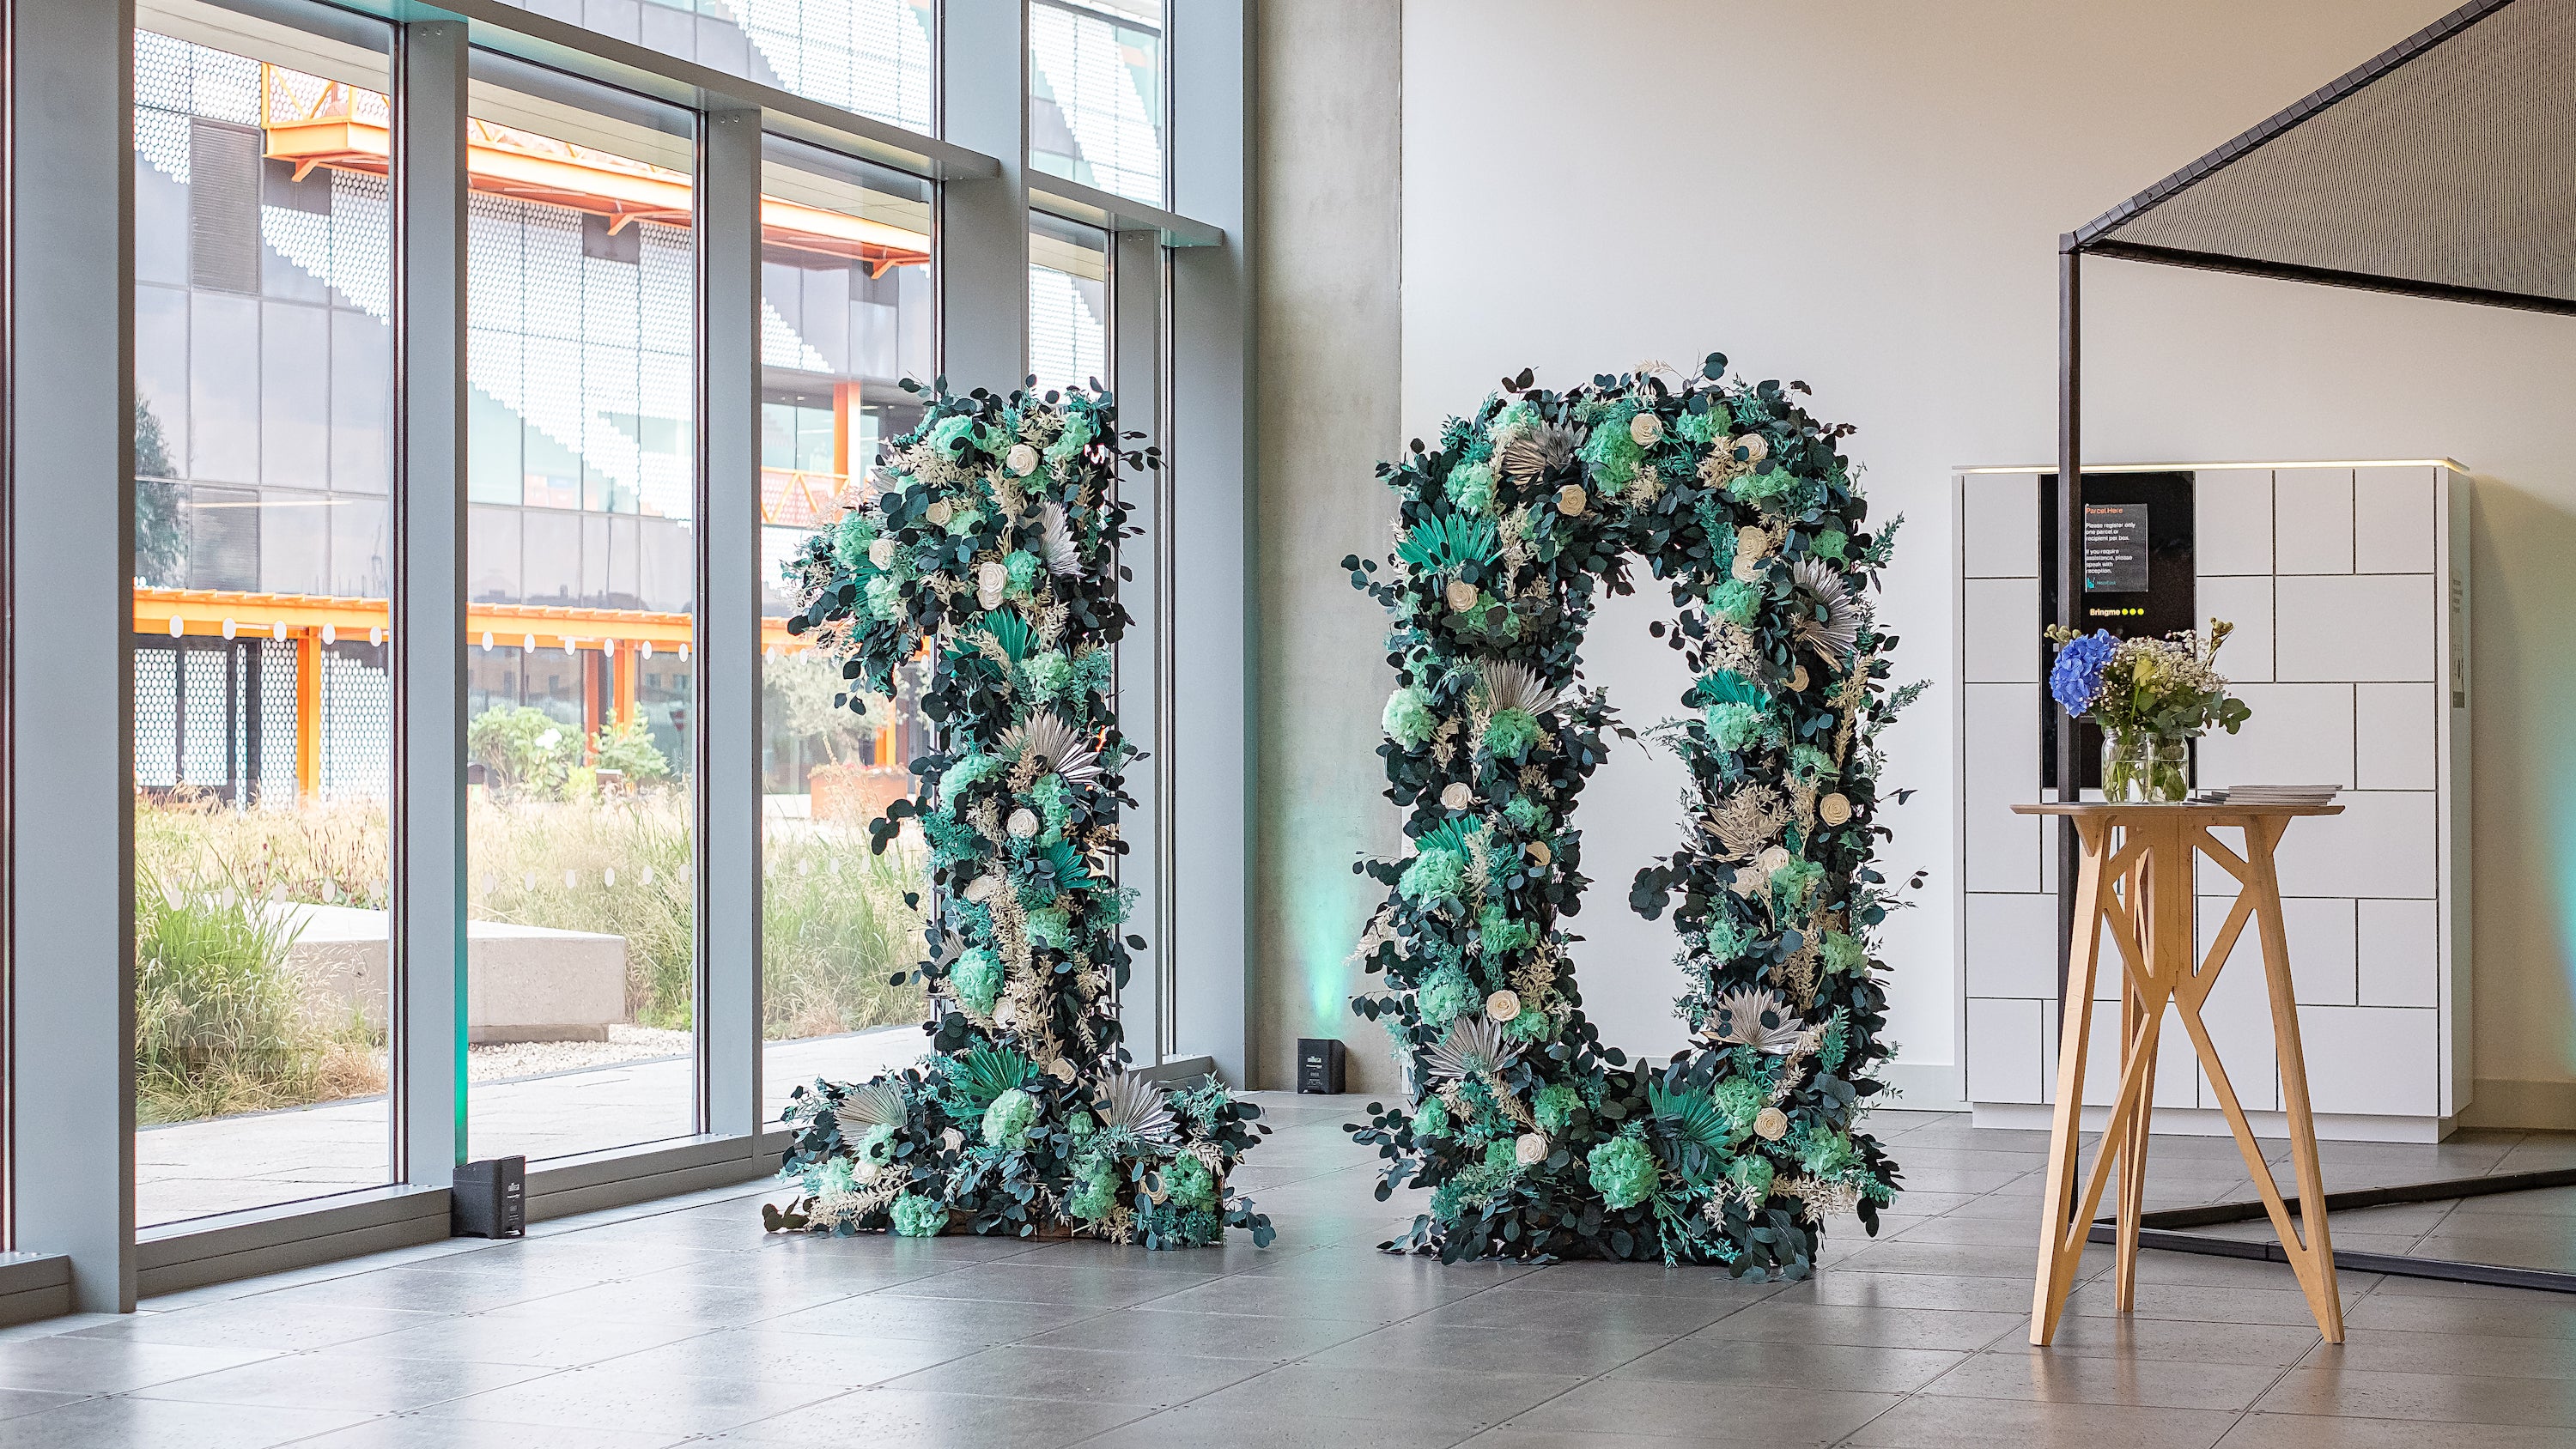 A bespoke floral installation was created using sustainable green stems especially for Here East’s anniversary celebration event by an event florist.